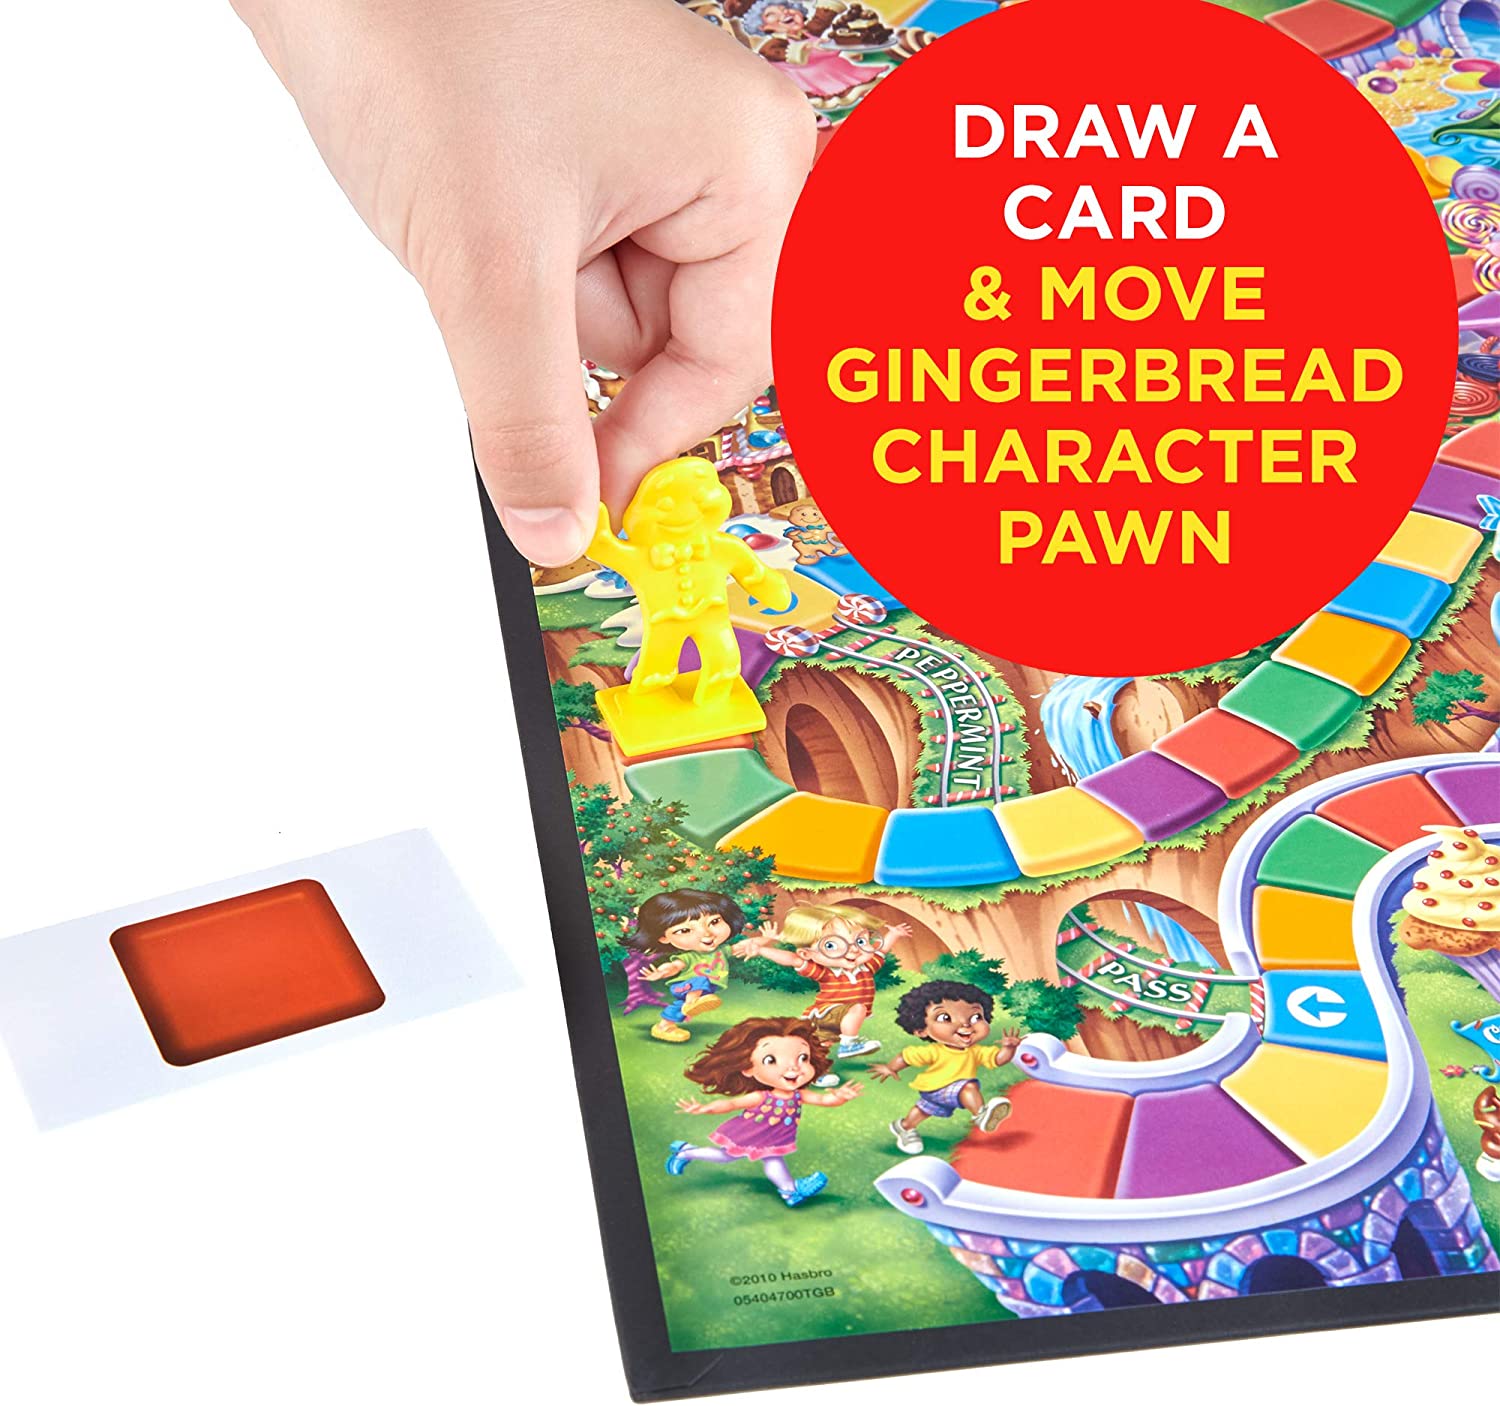 How to play Candy Land